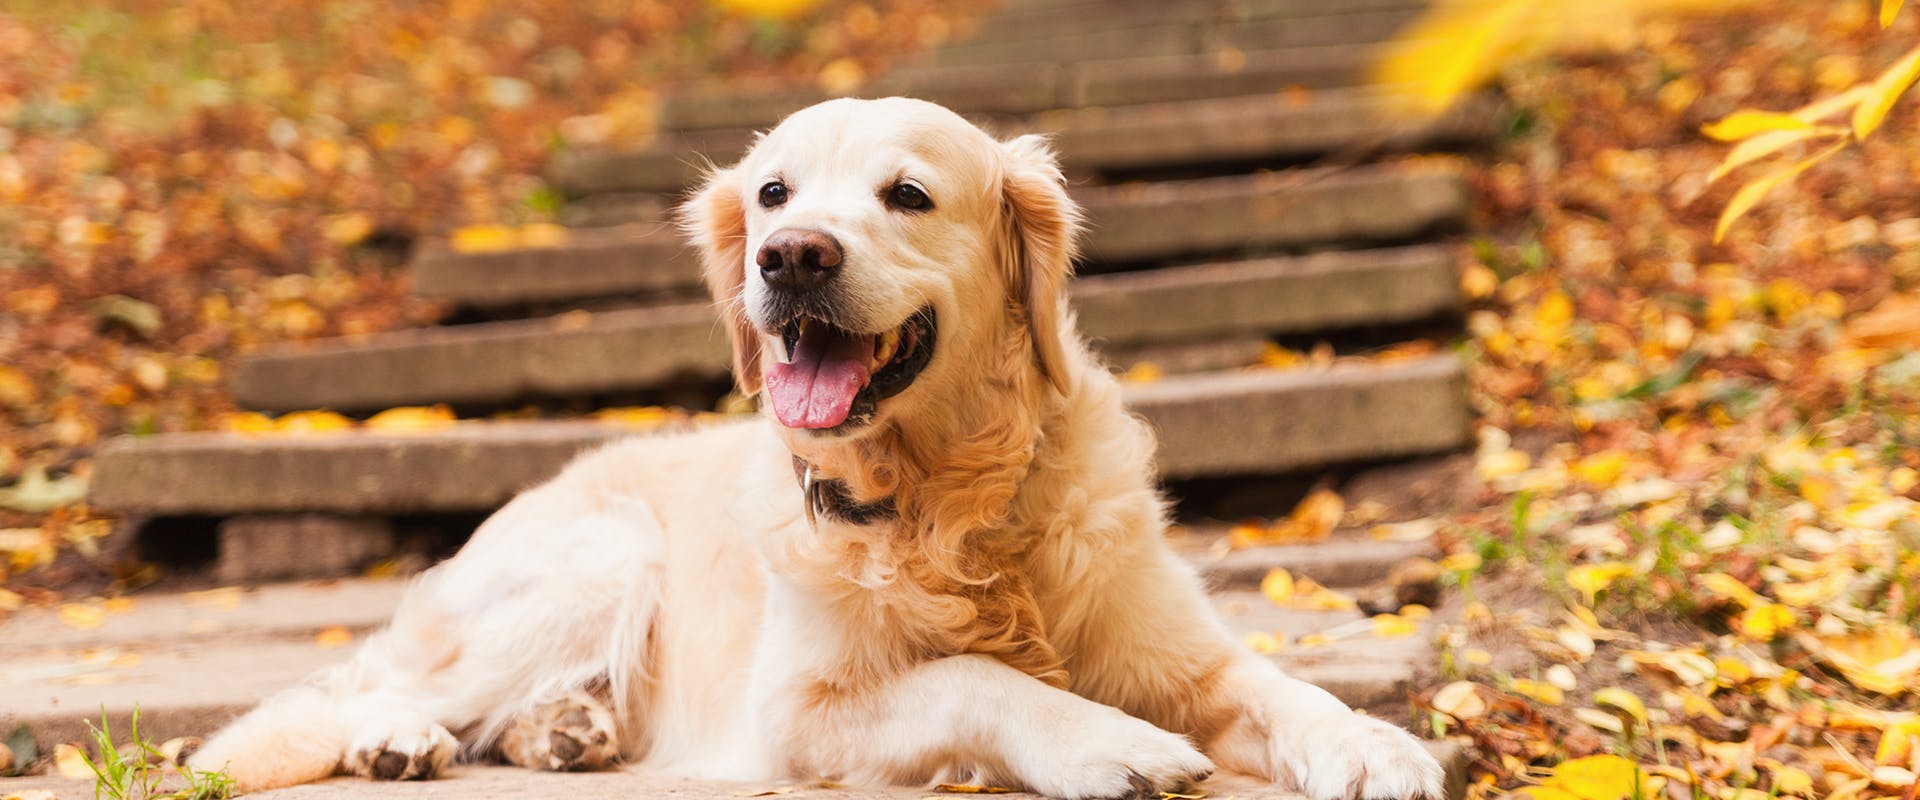 A Golden Retriever sitting on some steps surrounded by autumn leaves